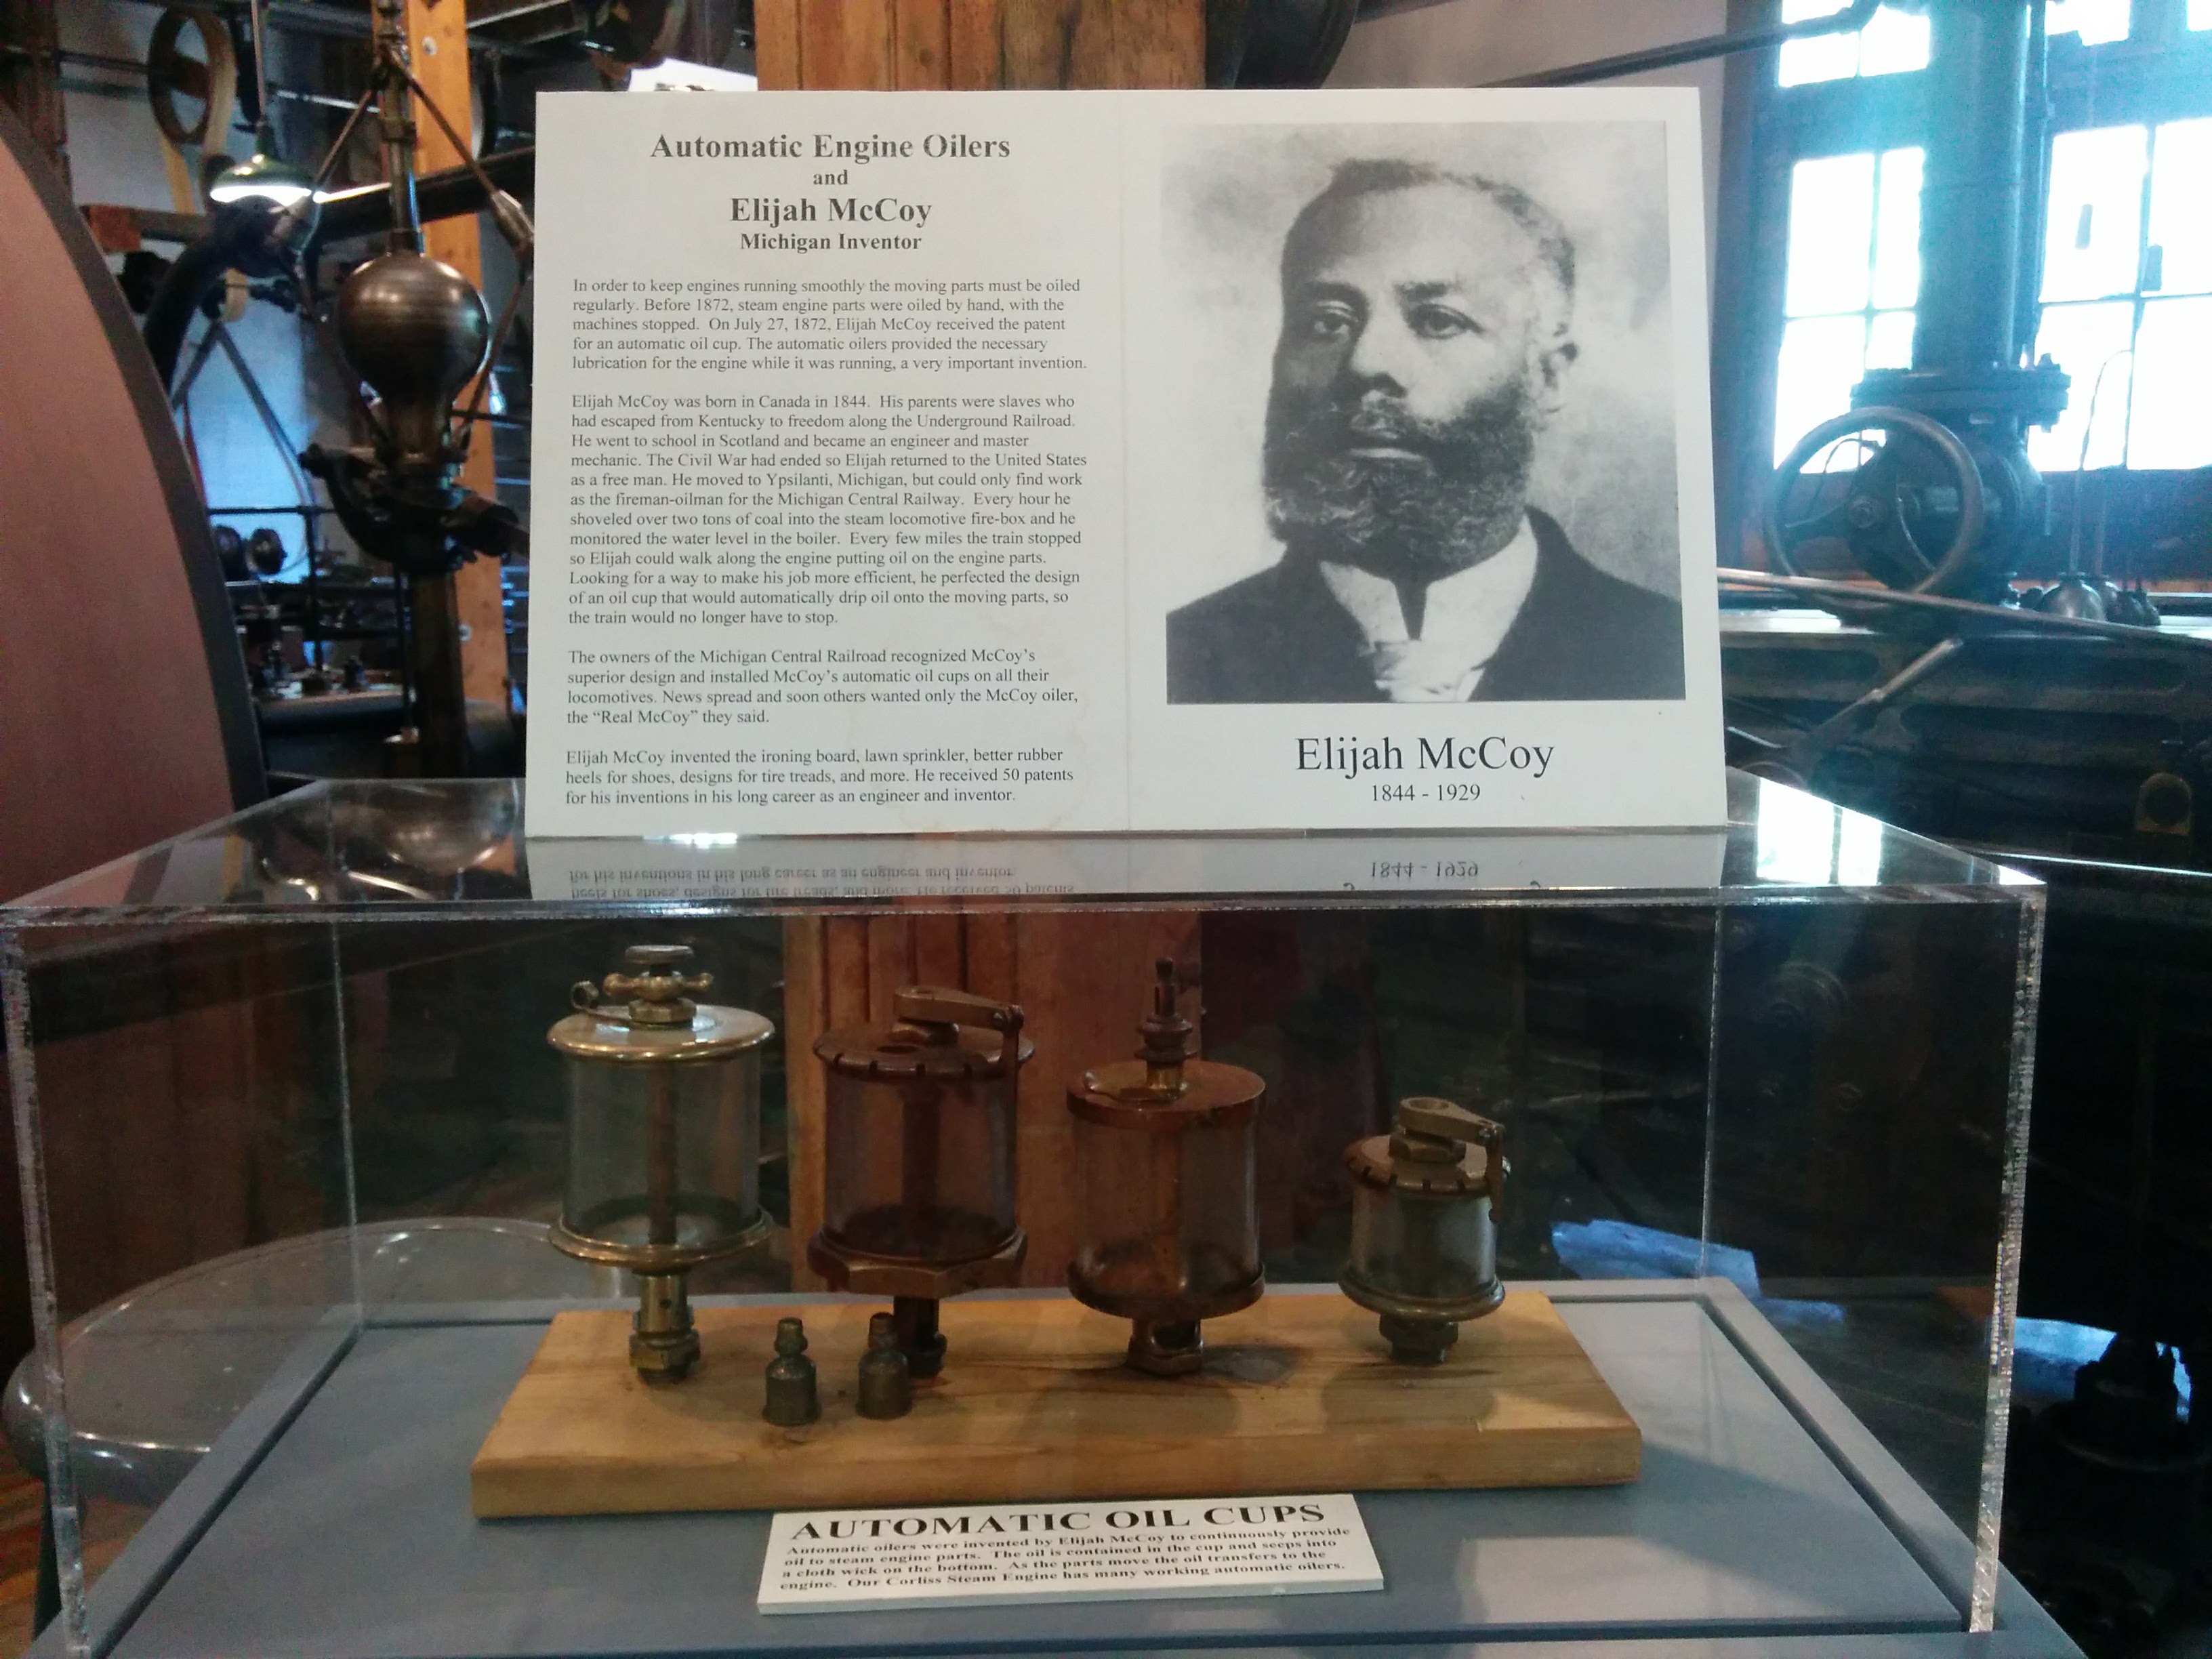 Elijah McCoy, whose parents escaped from slavery, invented the automatic engine oiler.